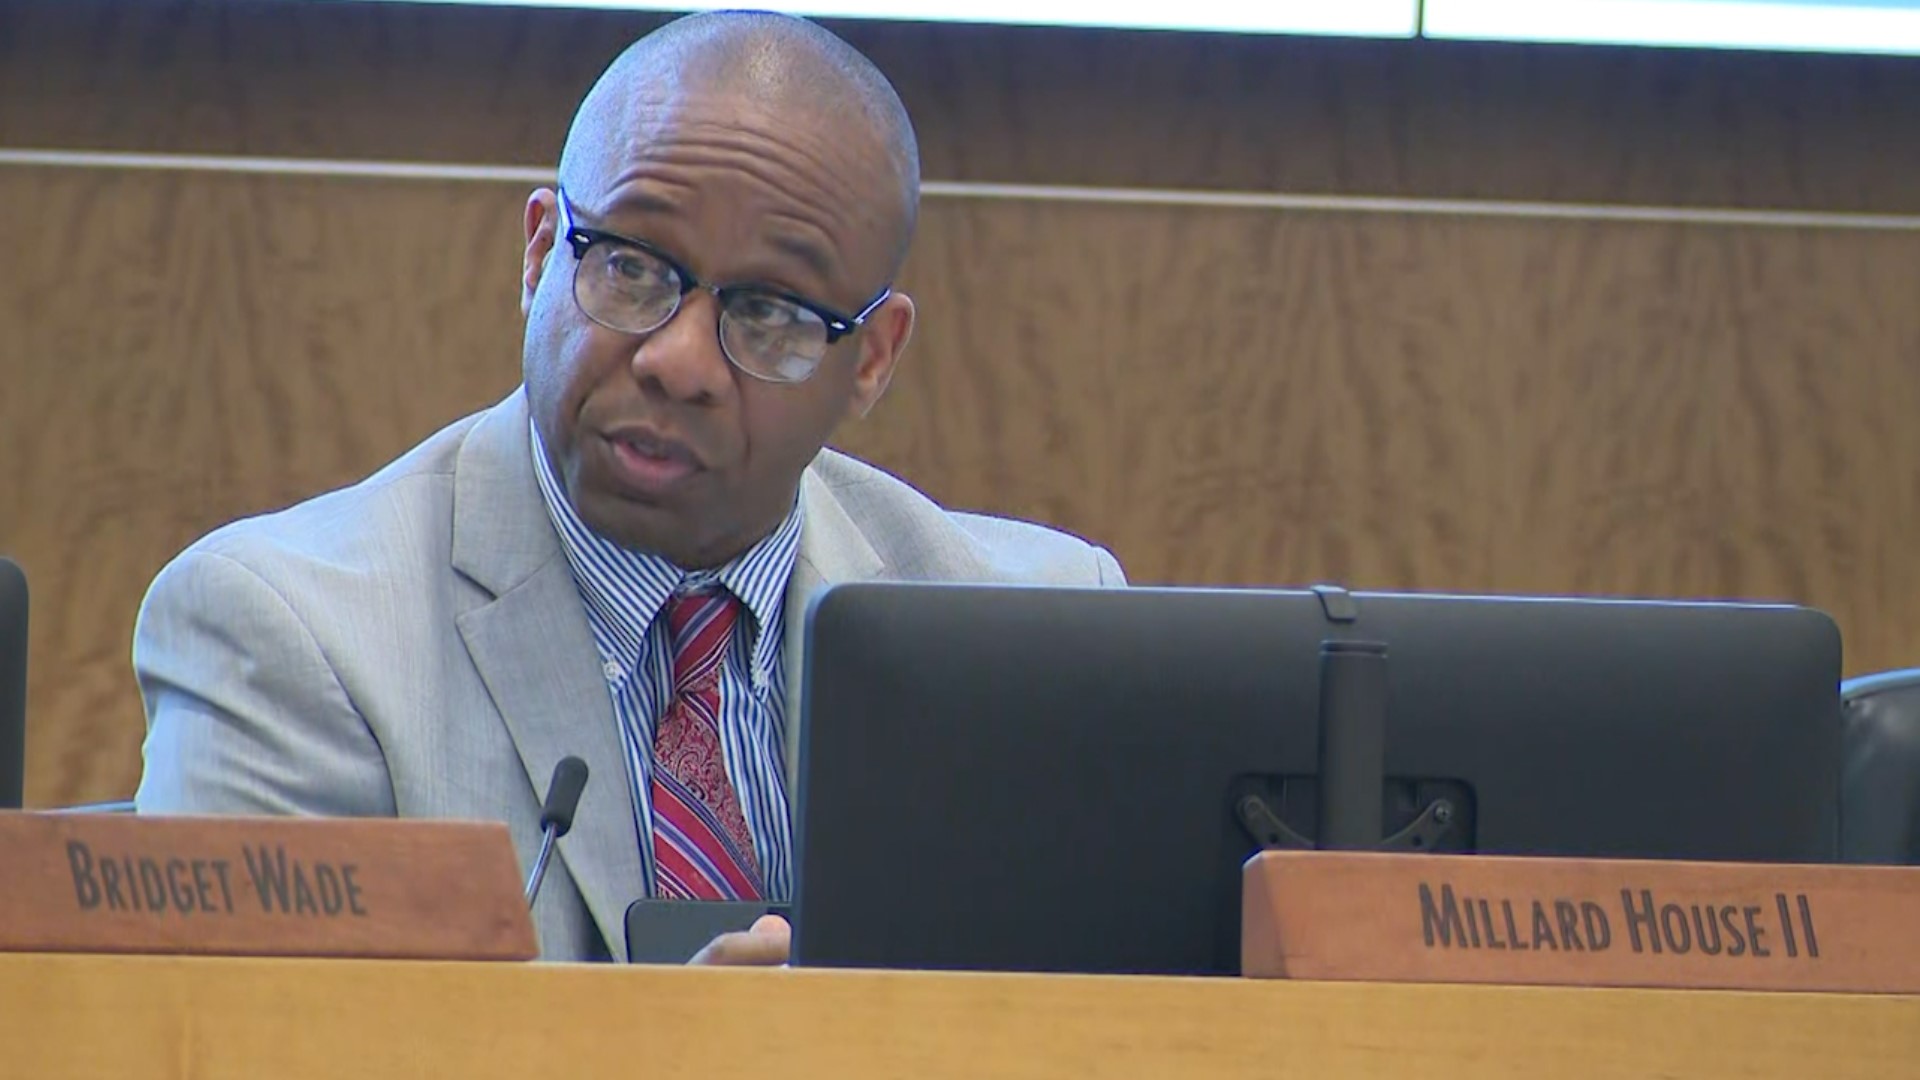 HISD Superintendent Millard House II had remained quiet about the news until Thursday when he made a short statement at the beginning of a board meeting.